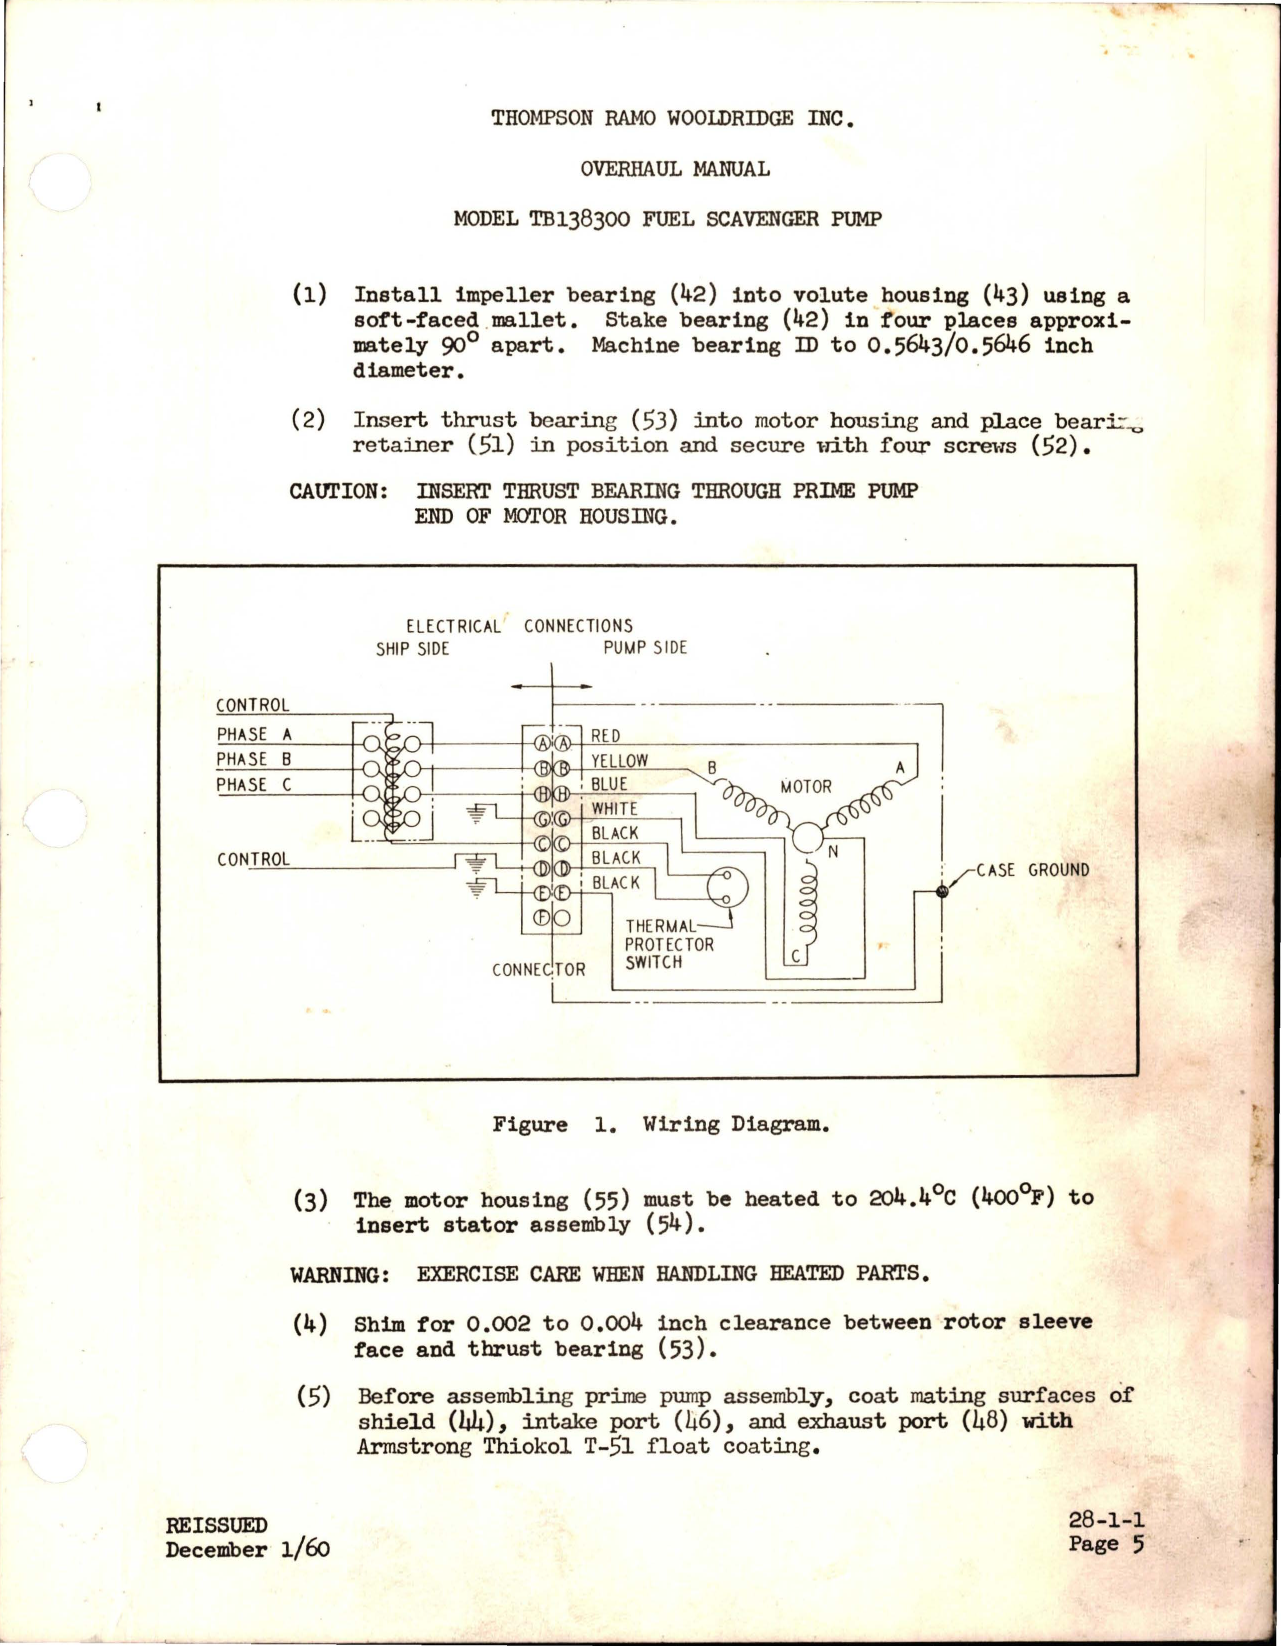 Sample page 5 from AirCorps Library document: Overhaul Manual for Fuel Scavenger Pump - Model TB138300